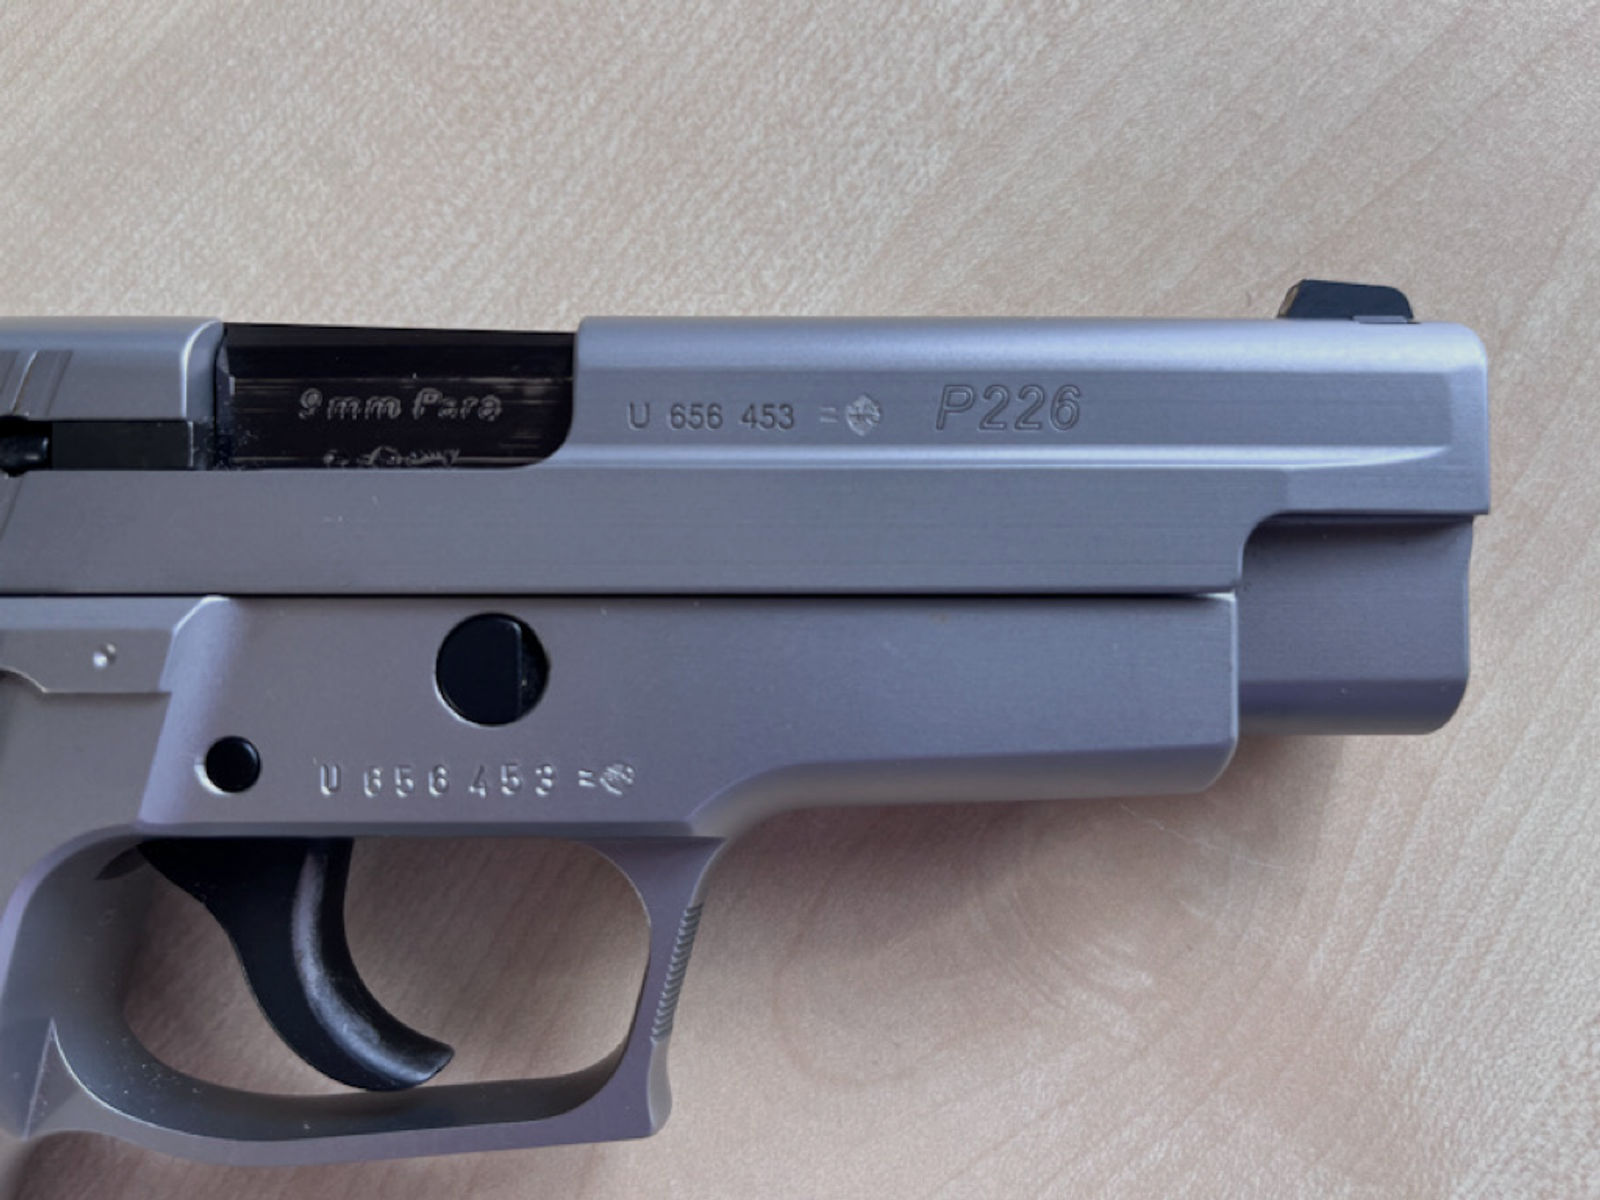 SIG SAUER P226 Stainless